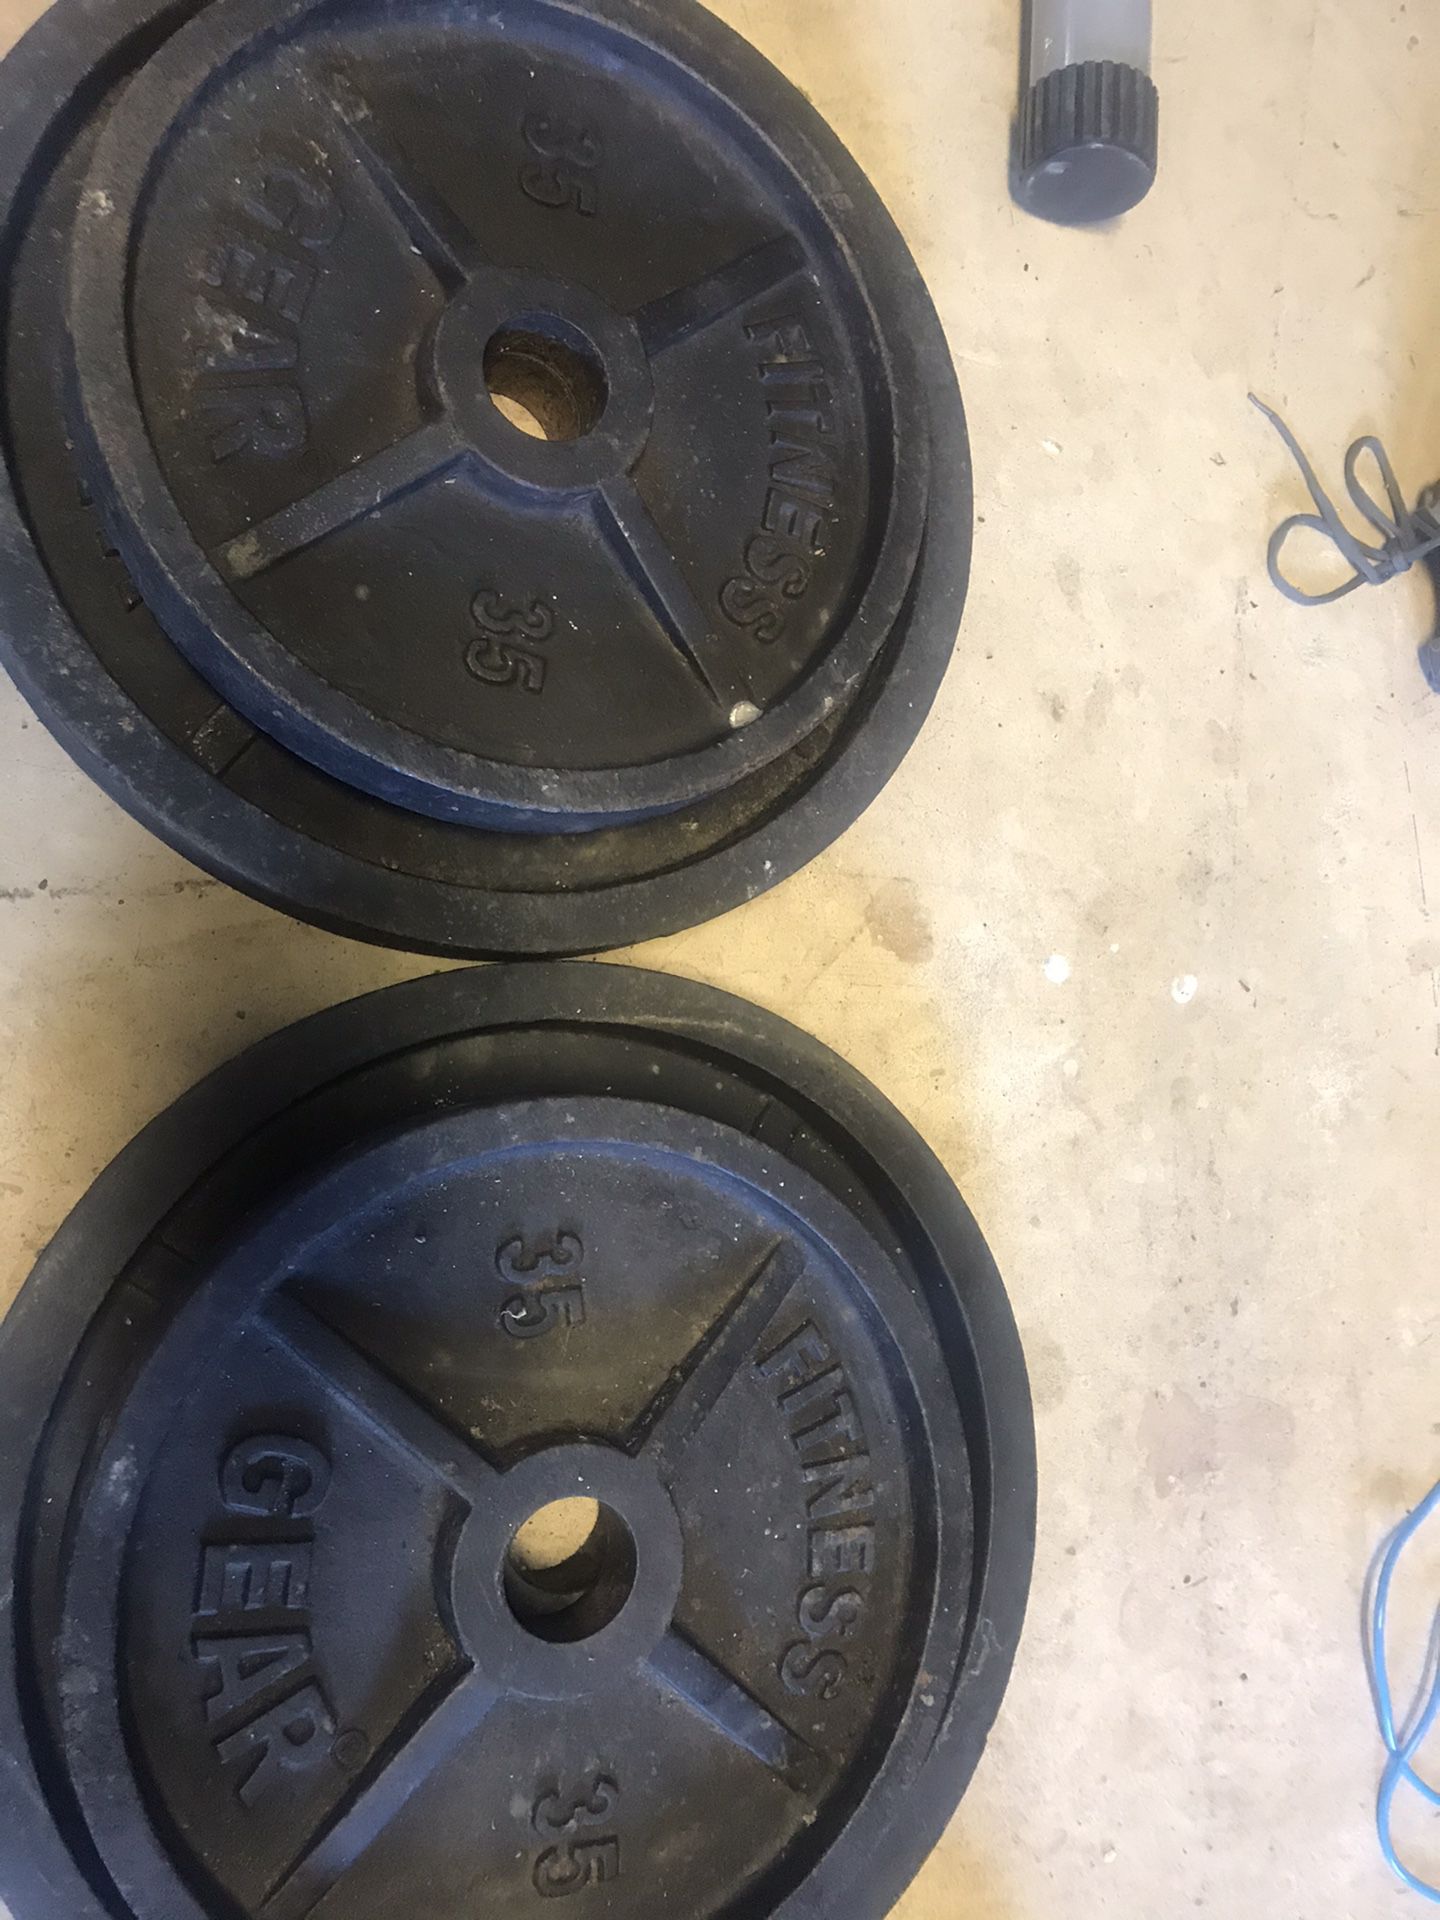 Pair of 35 Lbs Olympic weights plates